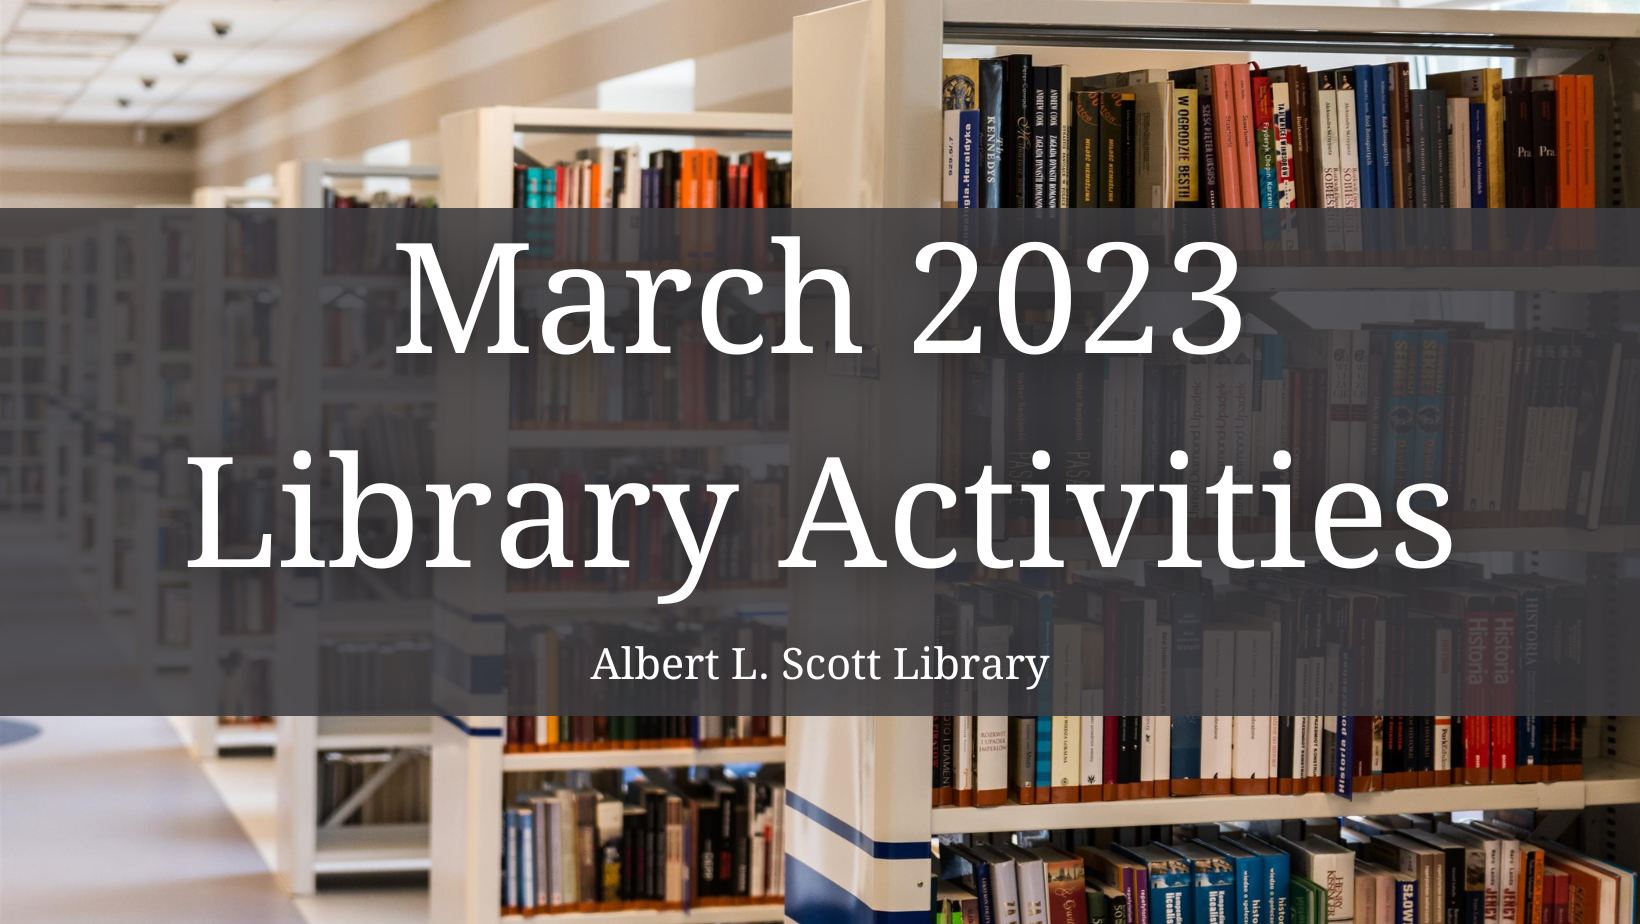 March Adult Programs at the Albert L. Scott Library